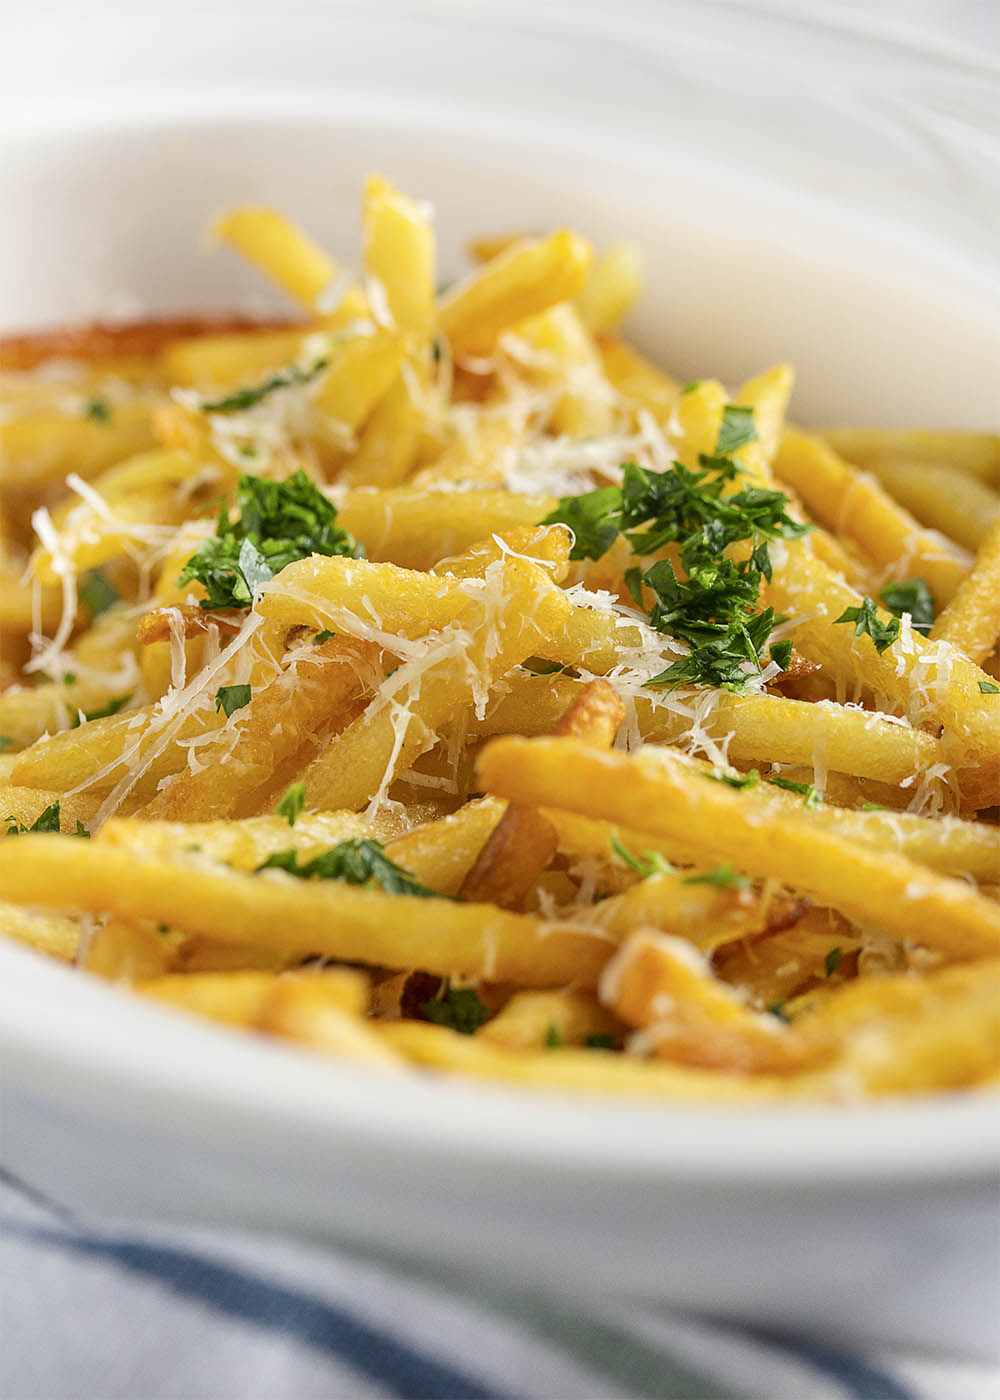 Image of Skinny Fries with Parmesan, Herbs and Truffle Oil